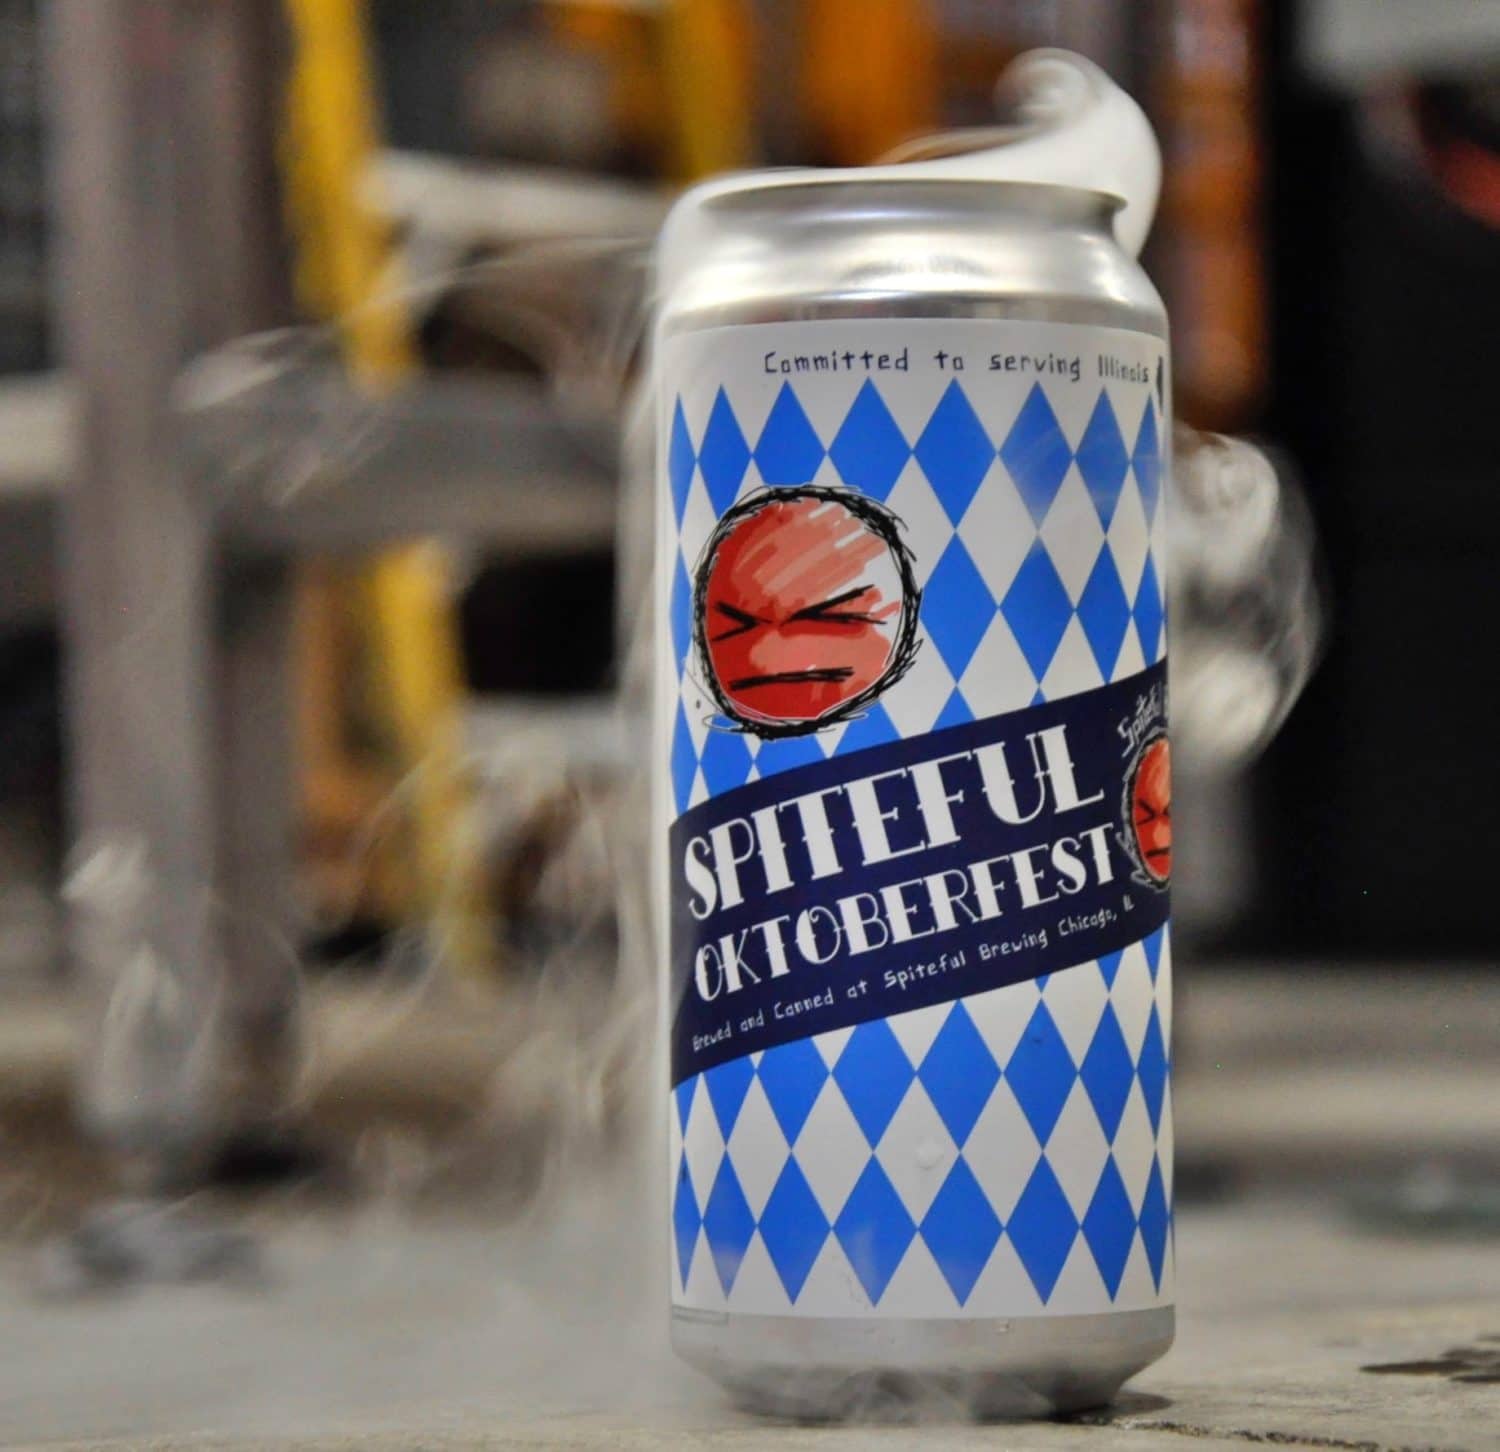 A photo of a can of Spiteful's Oktoberfest beer